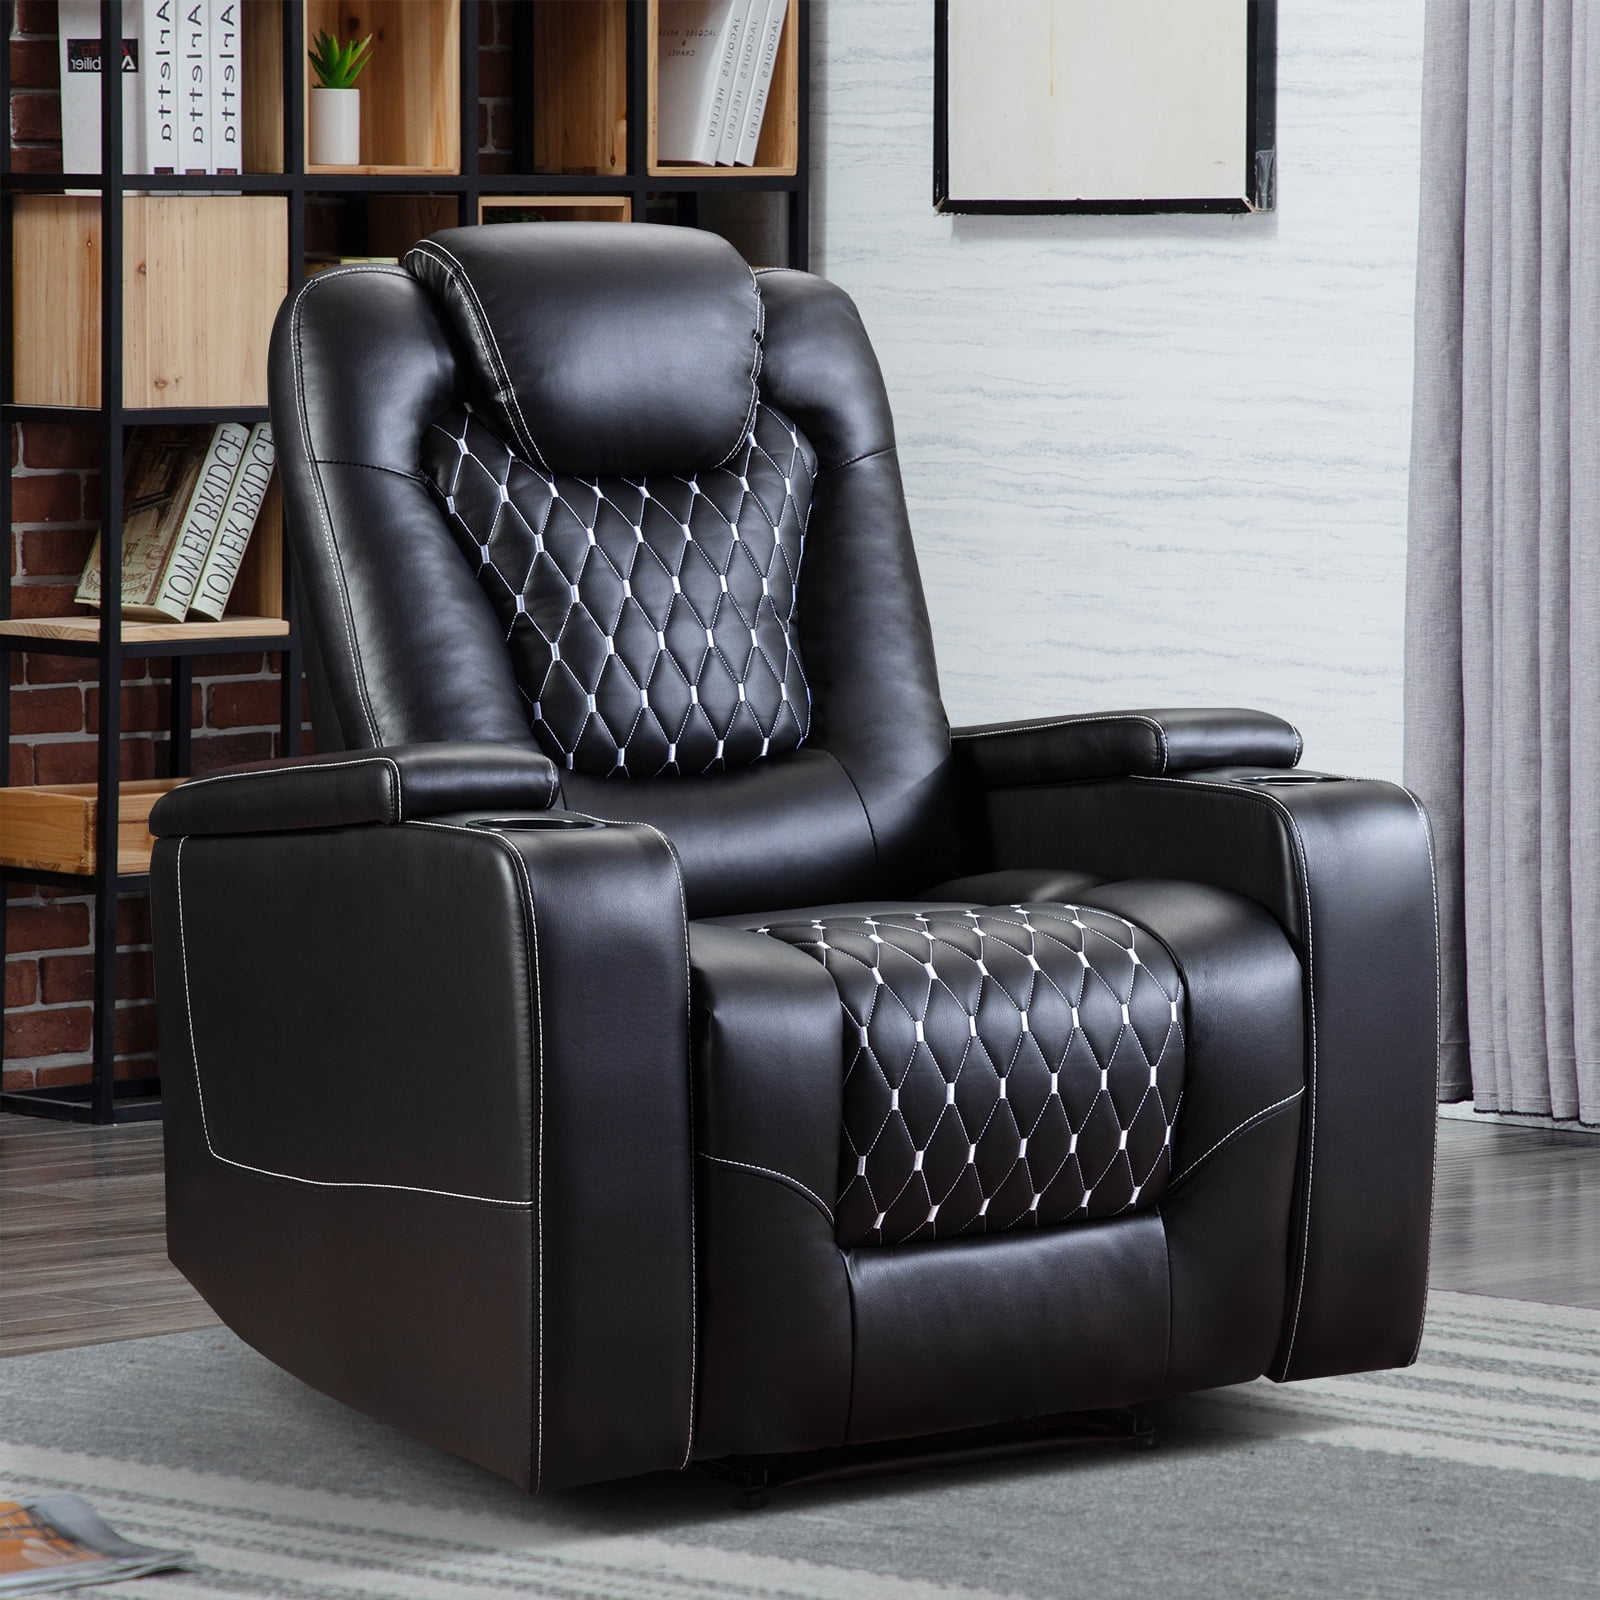 URTR Black Wood-Framed PU Leather Recliner Chair Adjustable Home Theater  Seating with Thick Seat Cushion and Backrest T-01280-B - The Home Depot